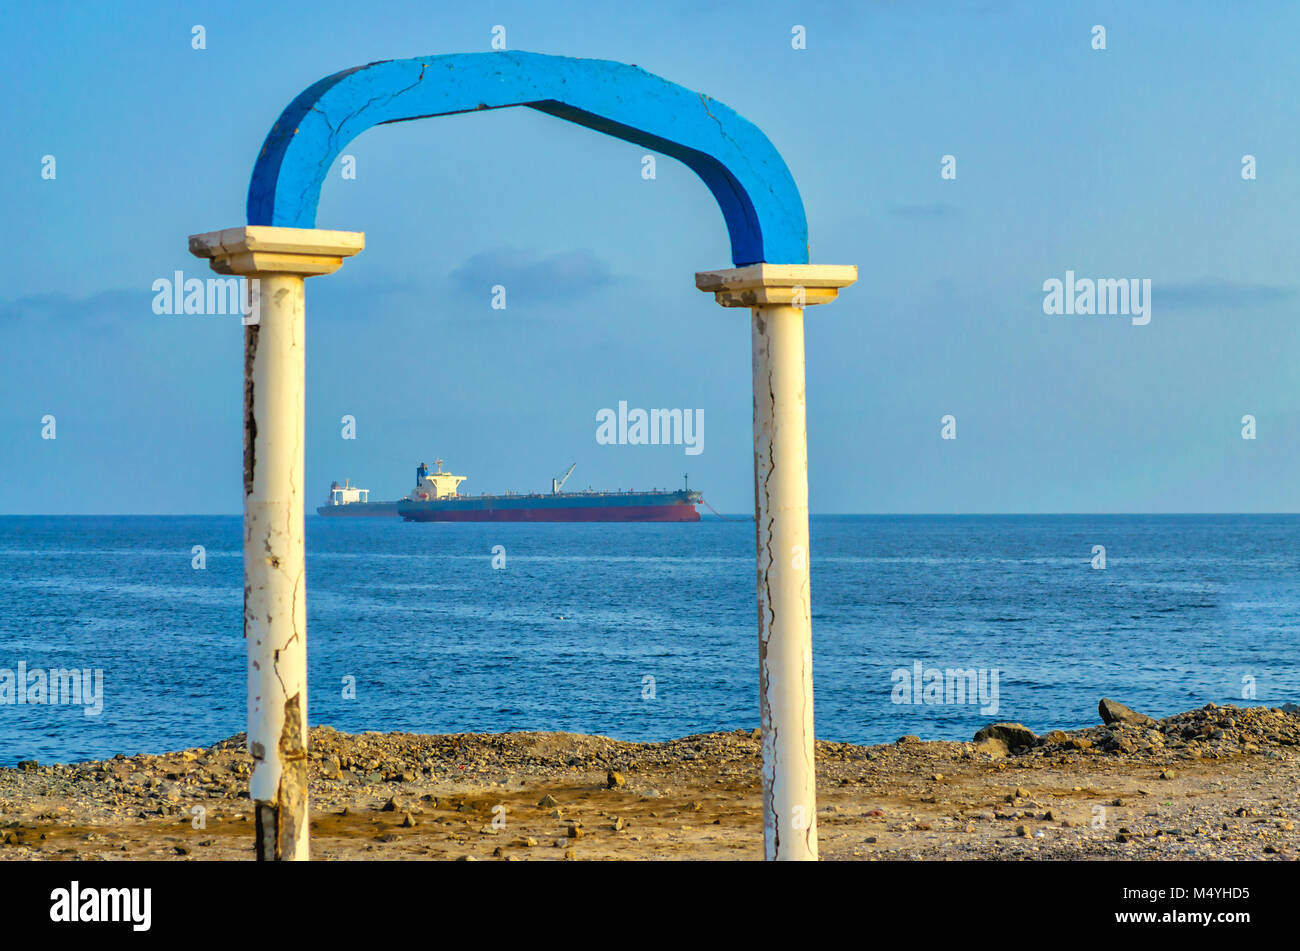 Two ships framed by an old, ruined arch on the beach. Stock Photo